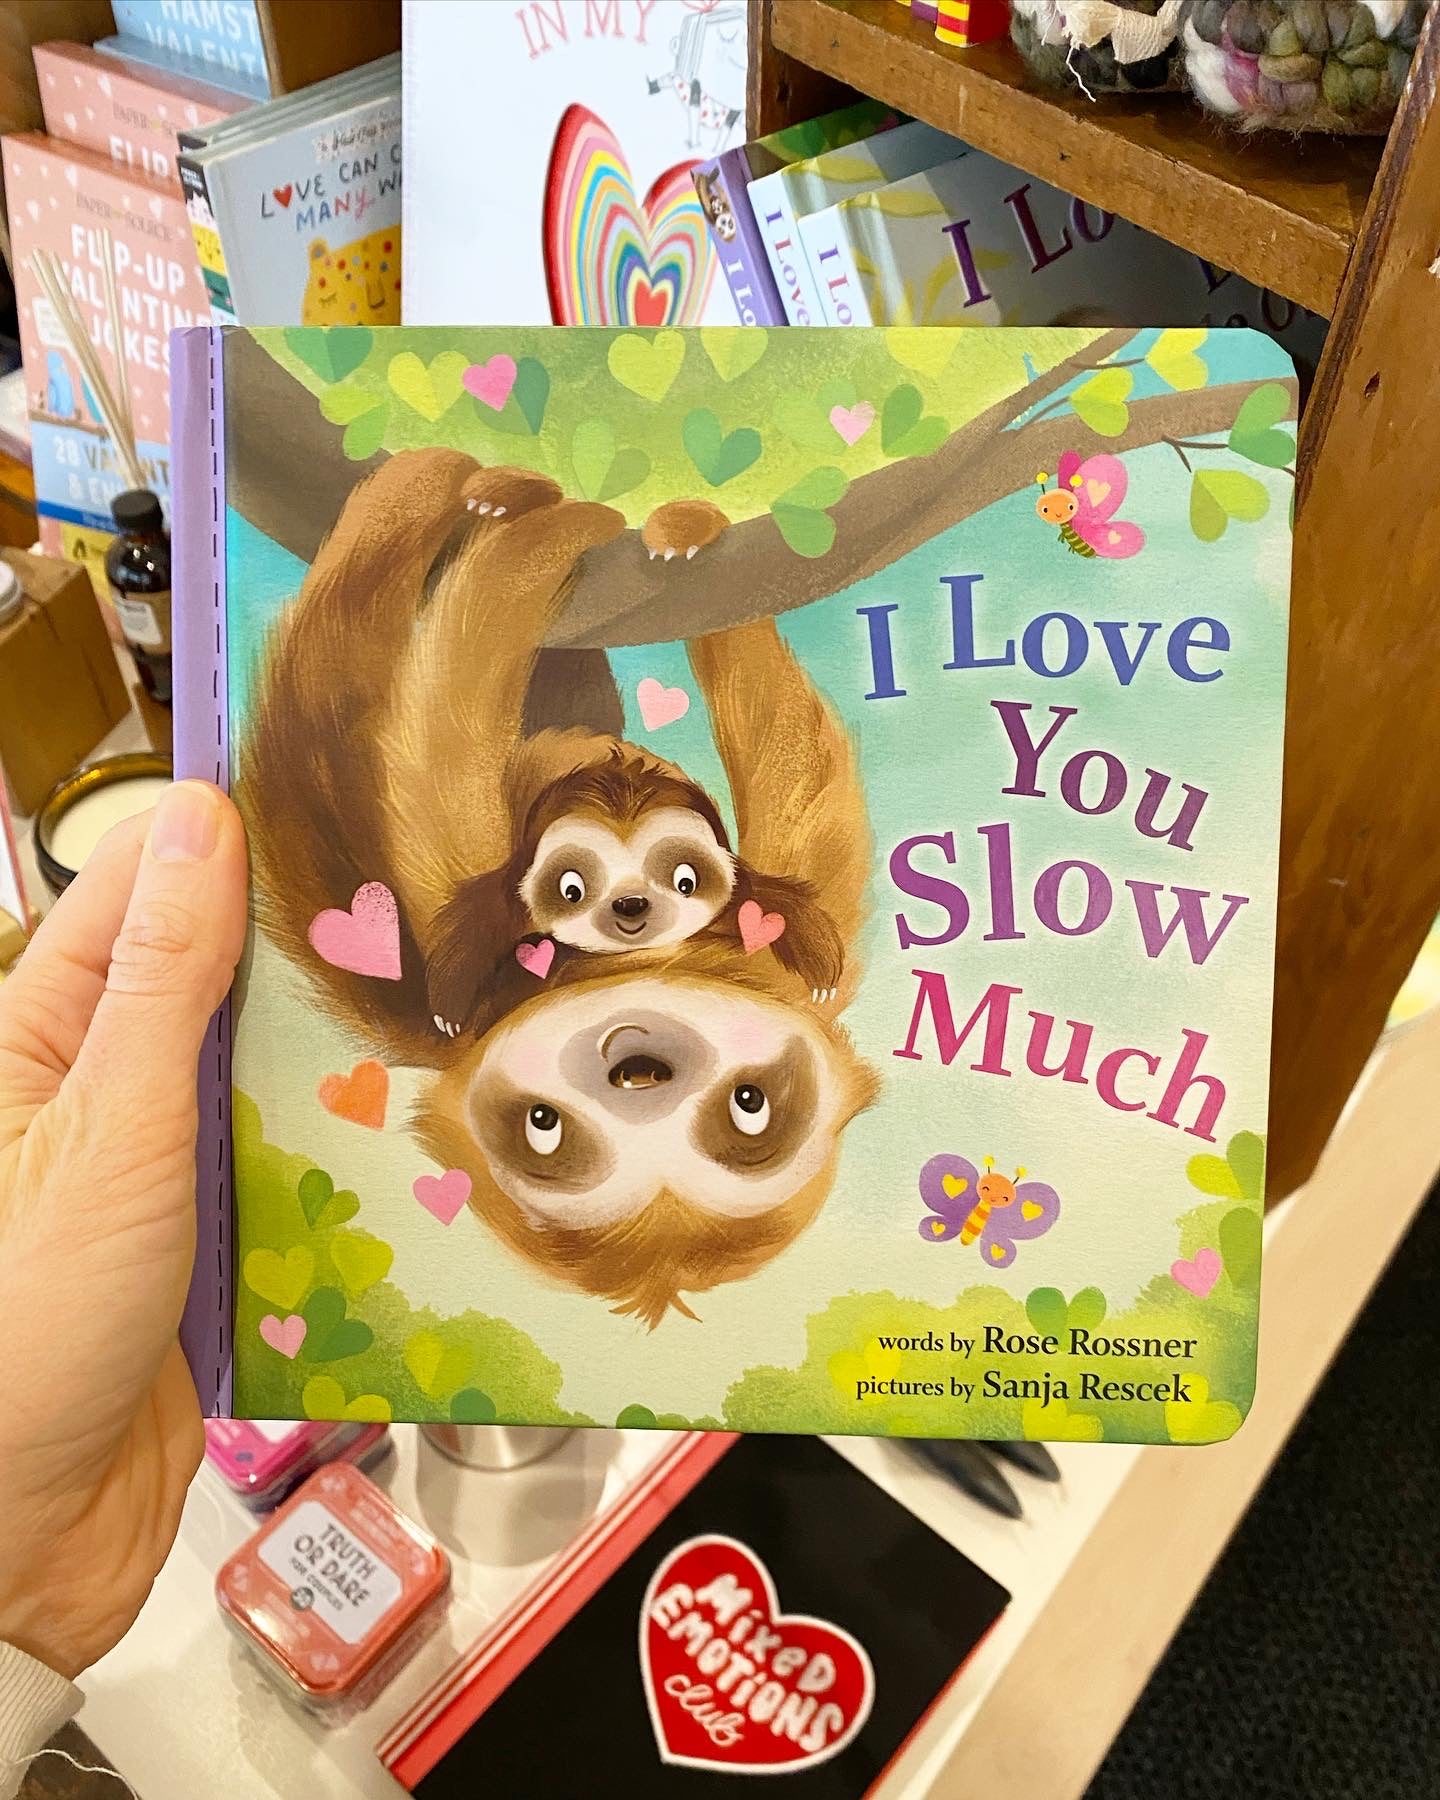 I Love You Slow Much Book